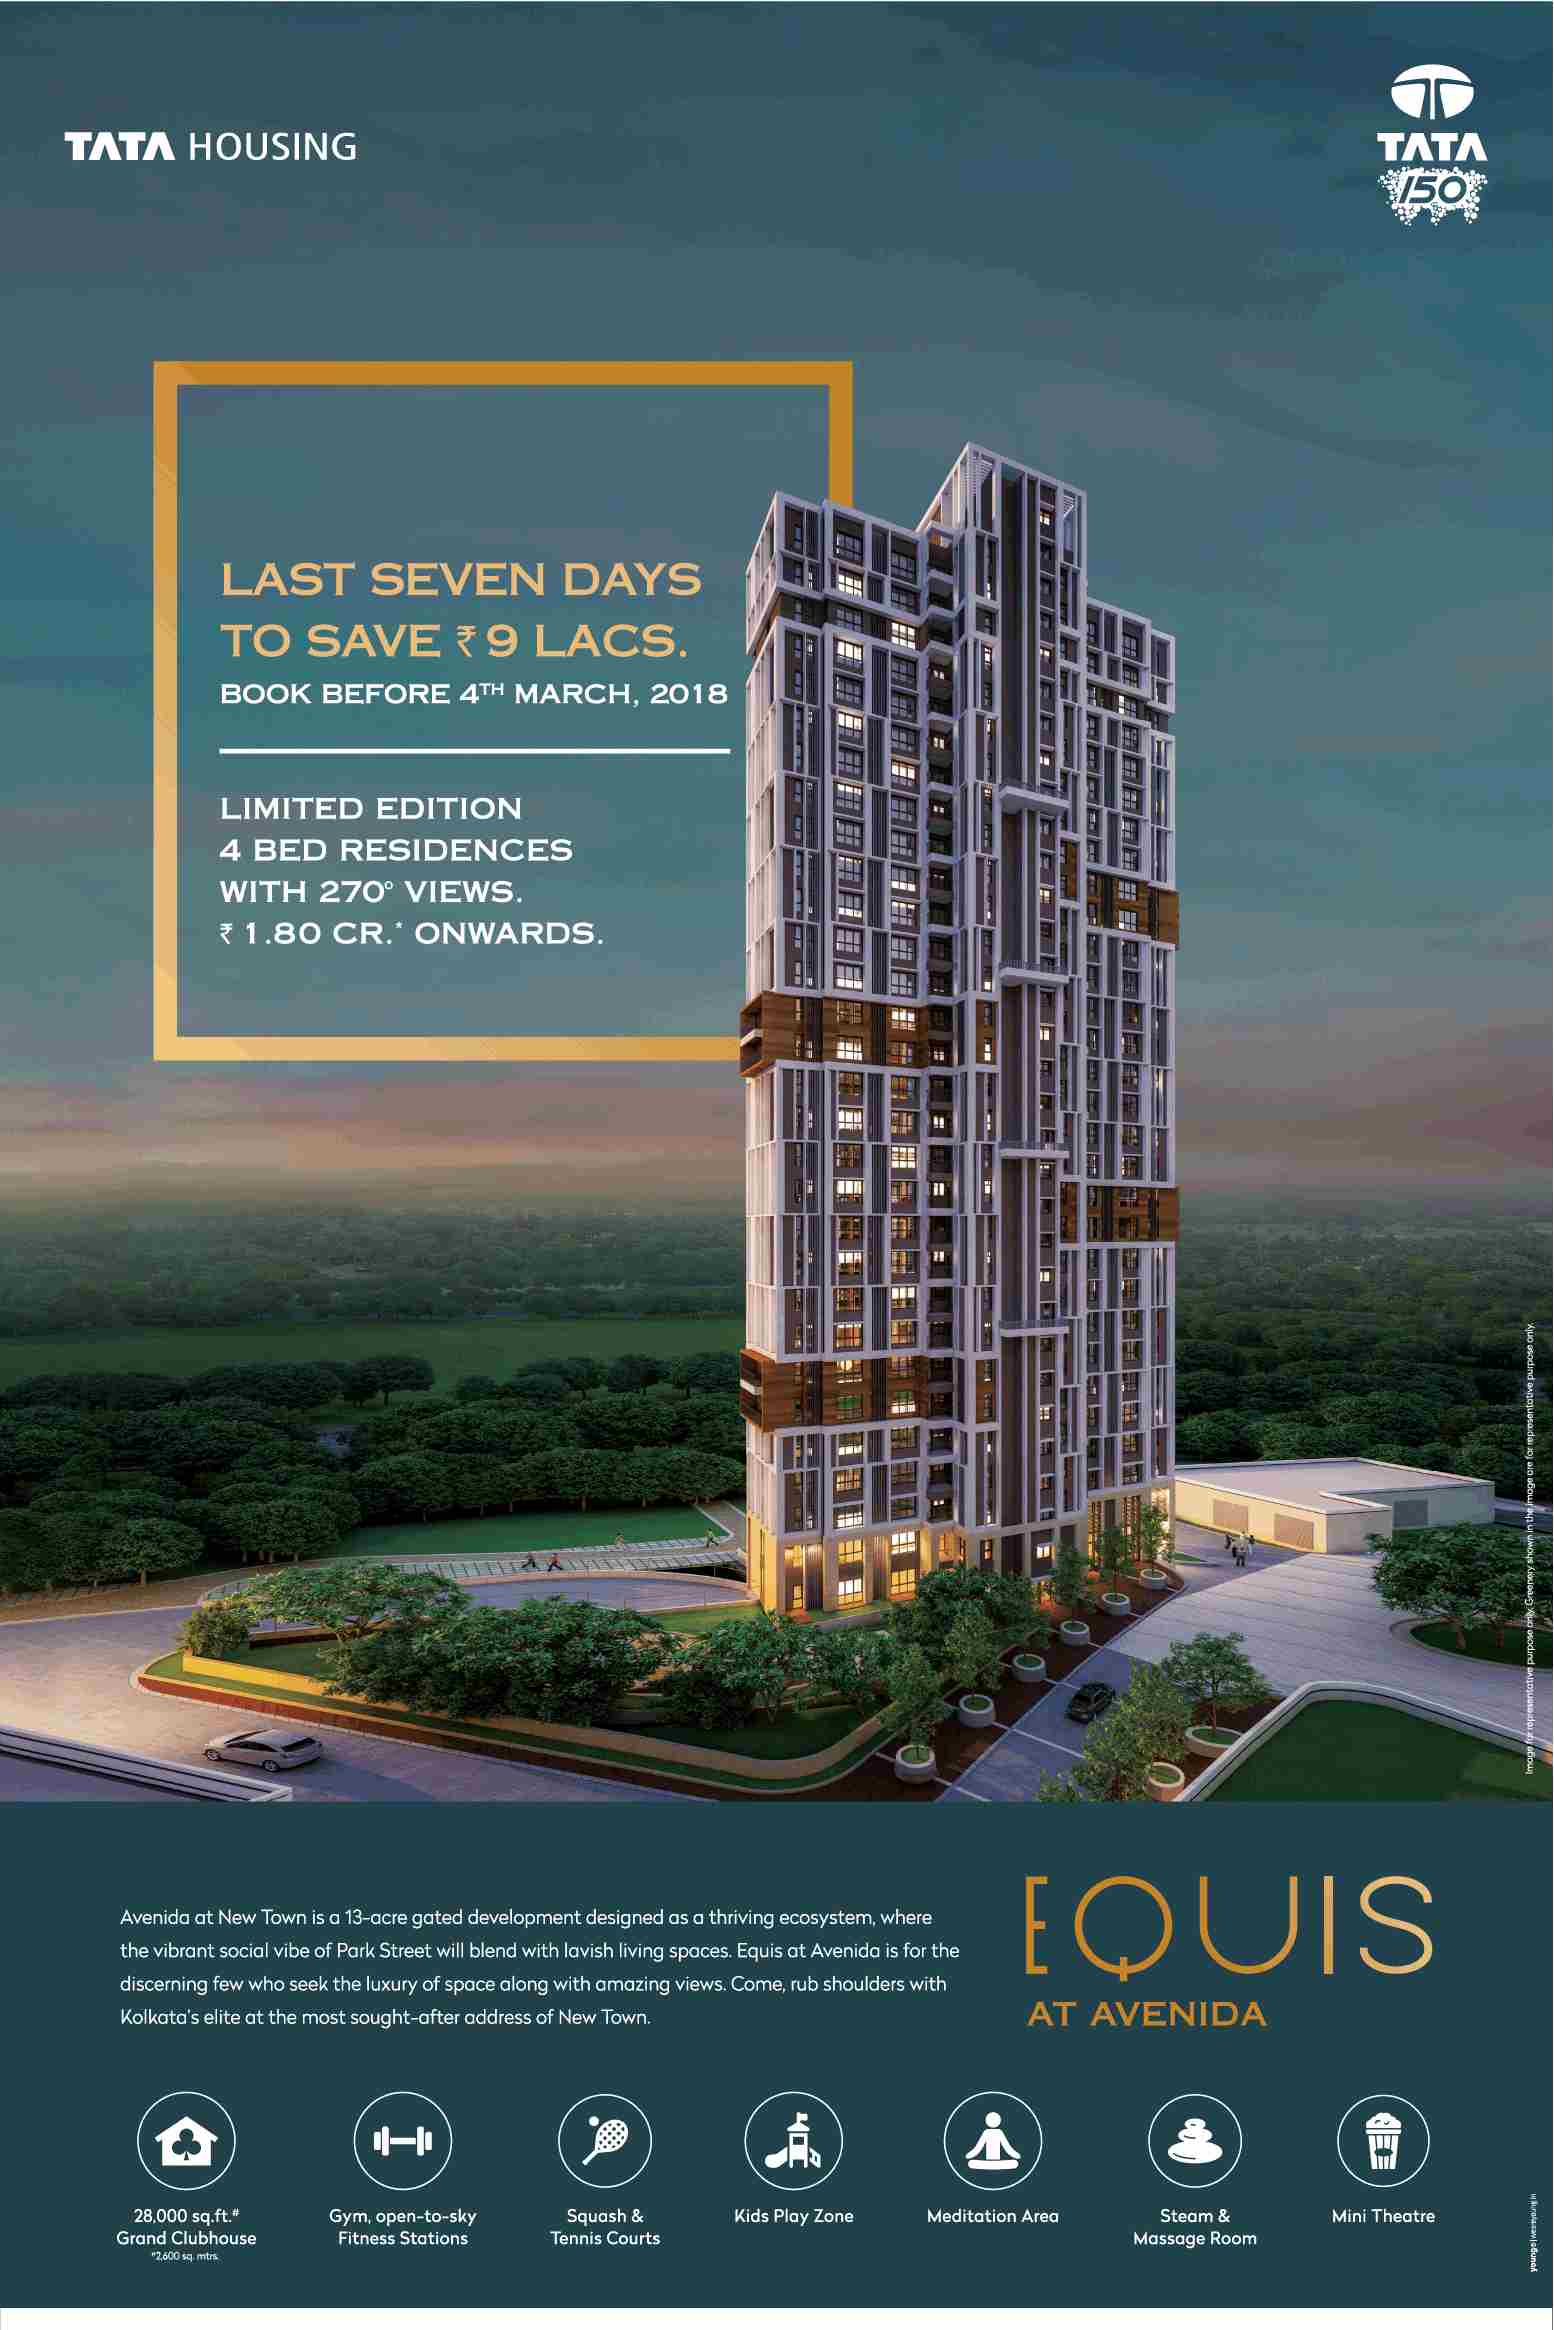 Equis at Tata Avenida for discerning few who seek luxury of space along with amazing views in Kolkata Update